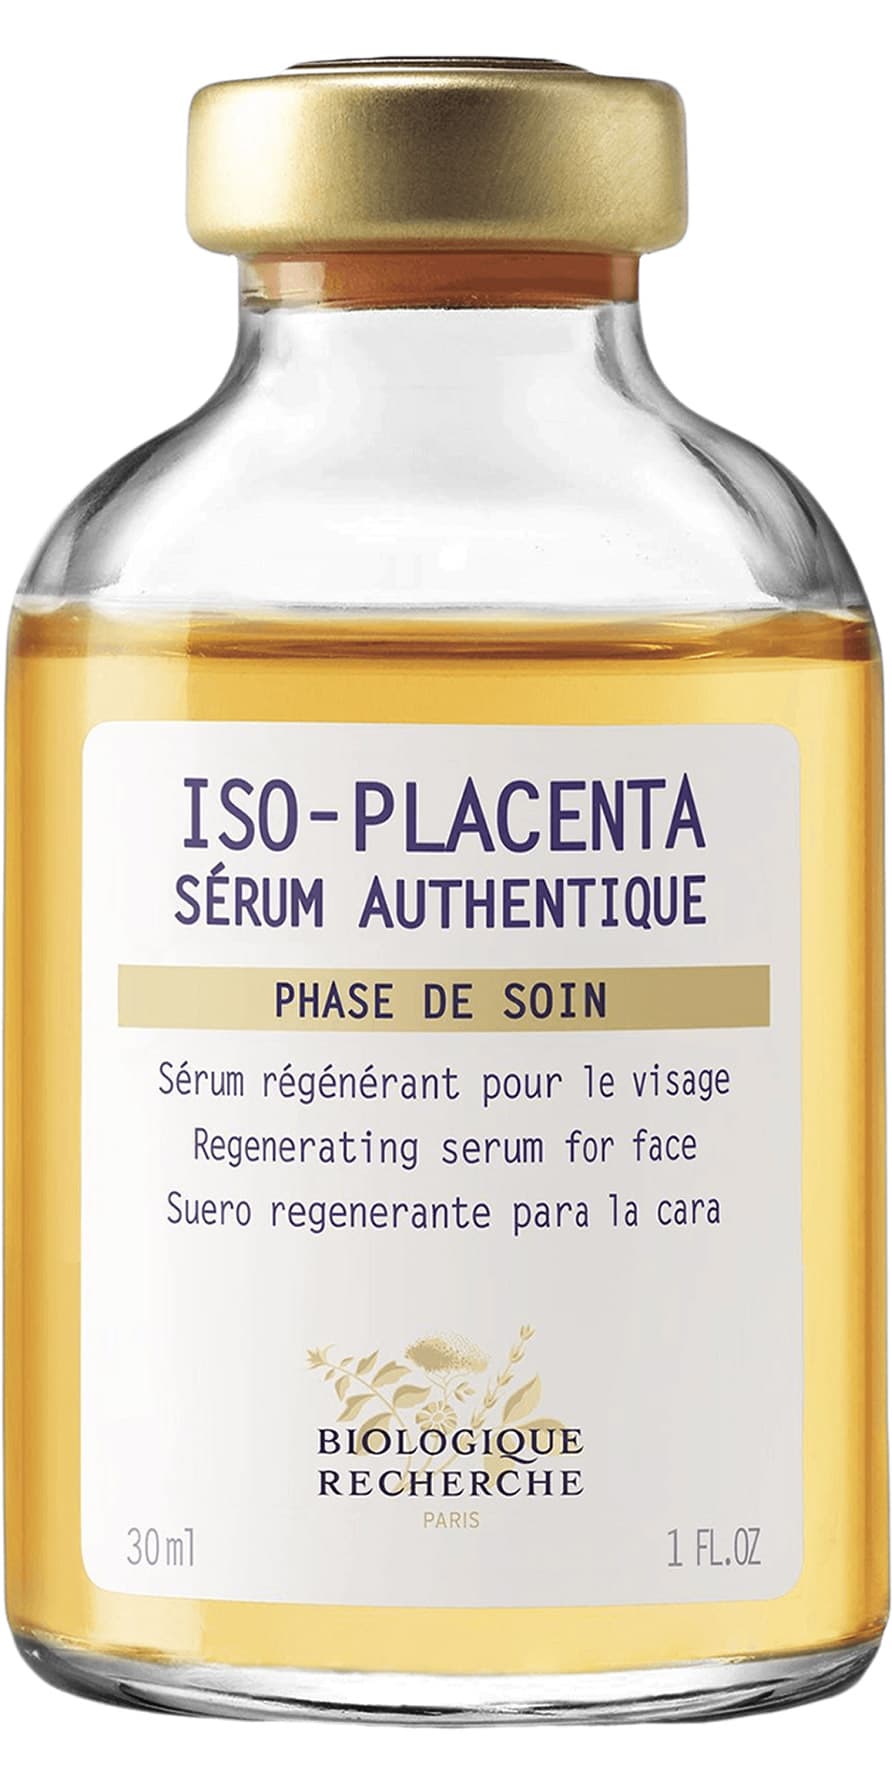 variant-30ml-product-page-image